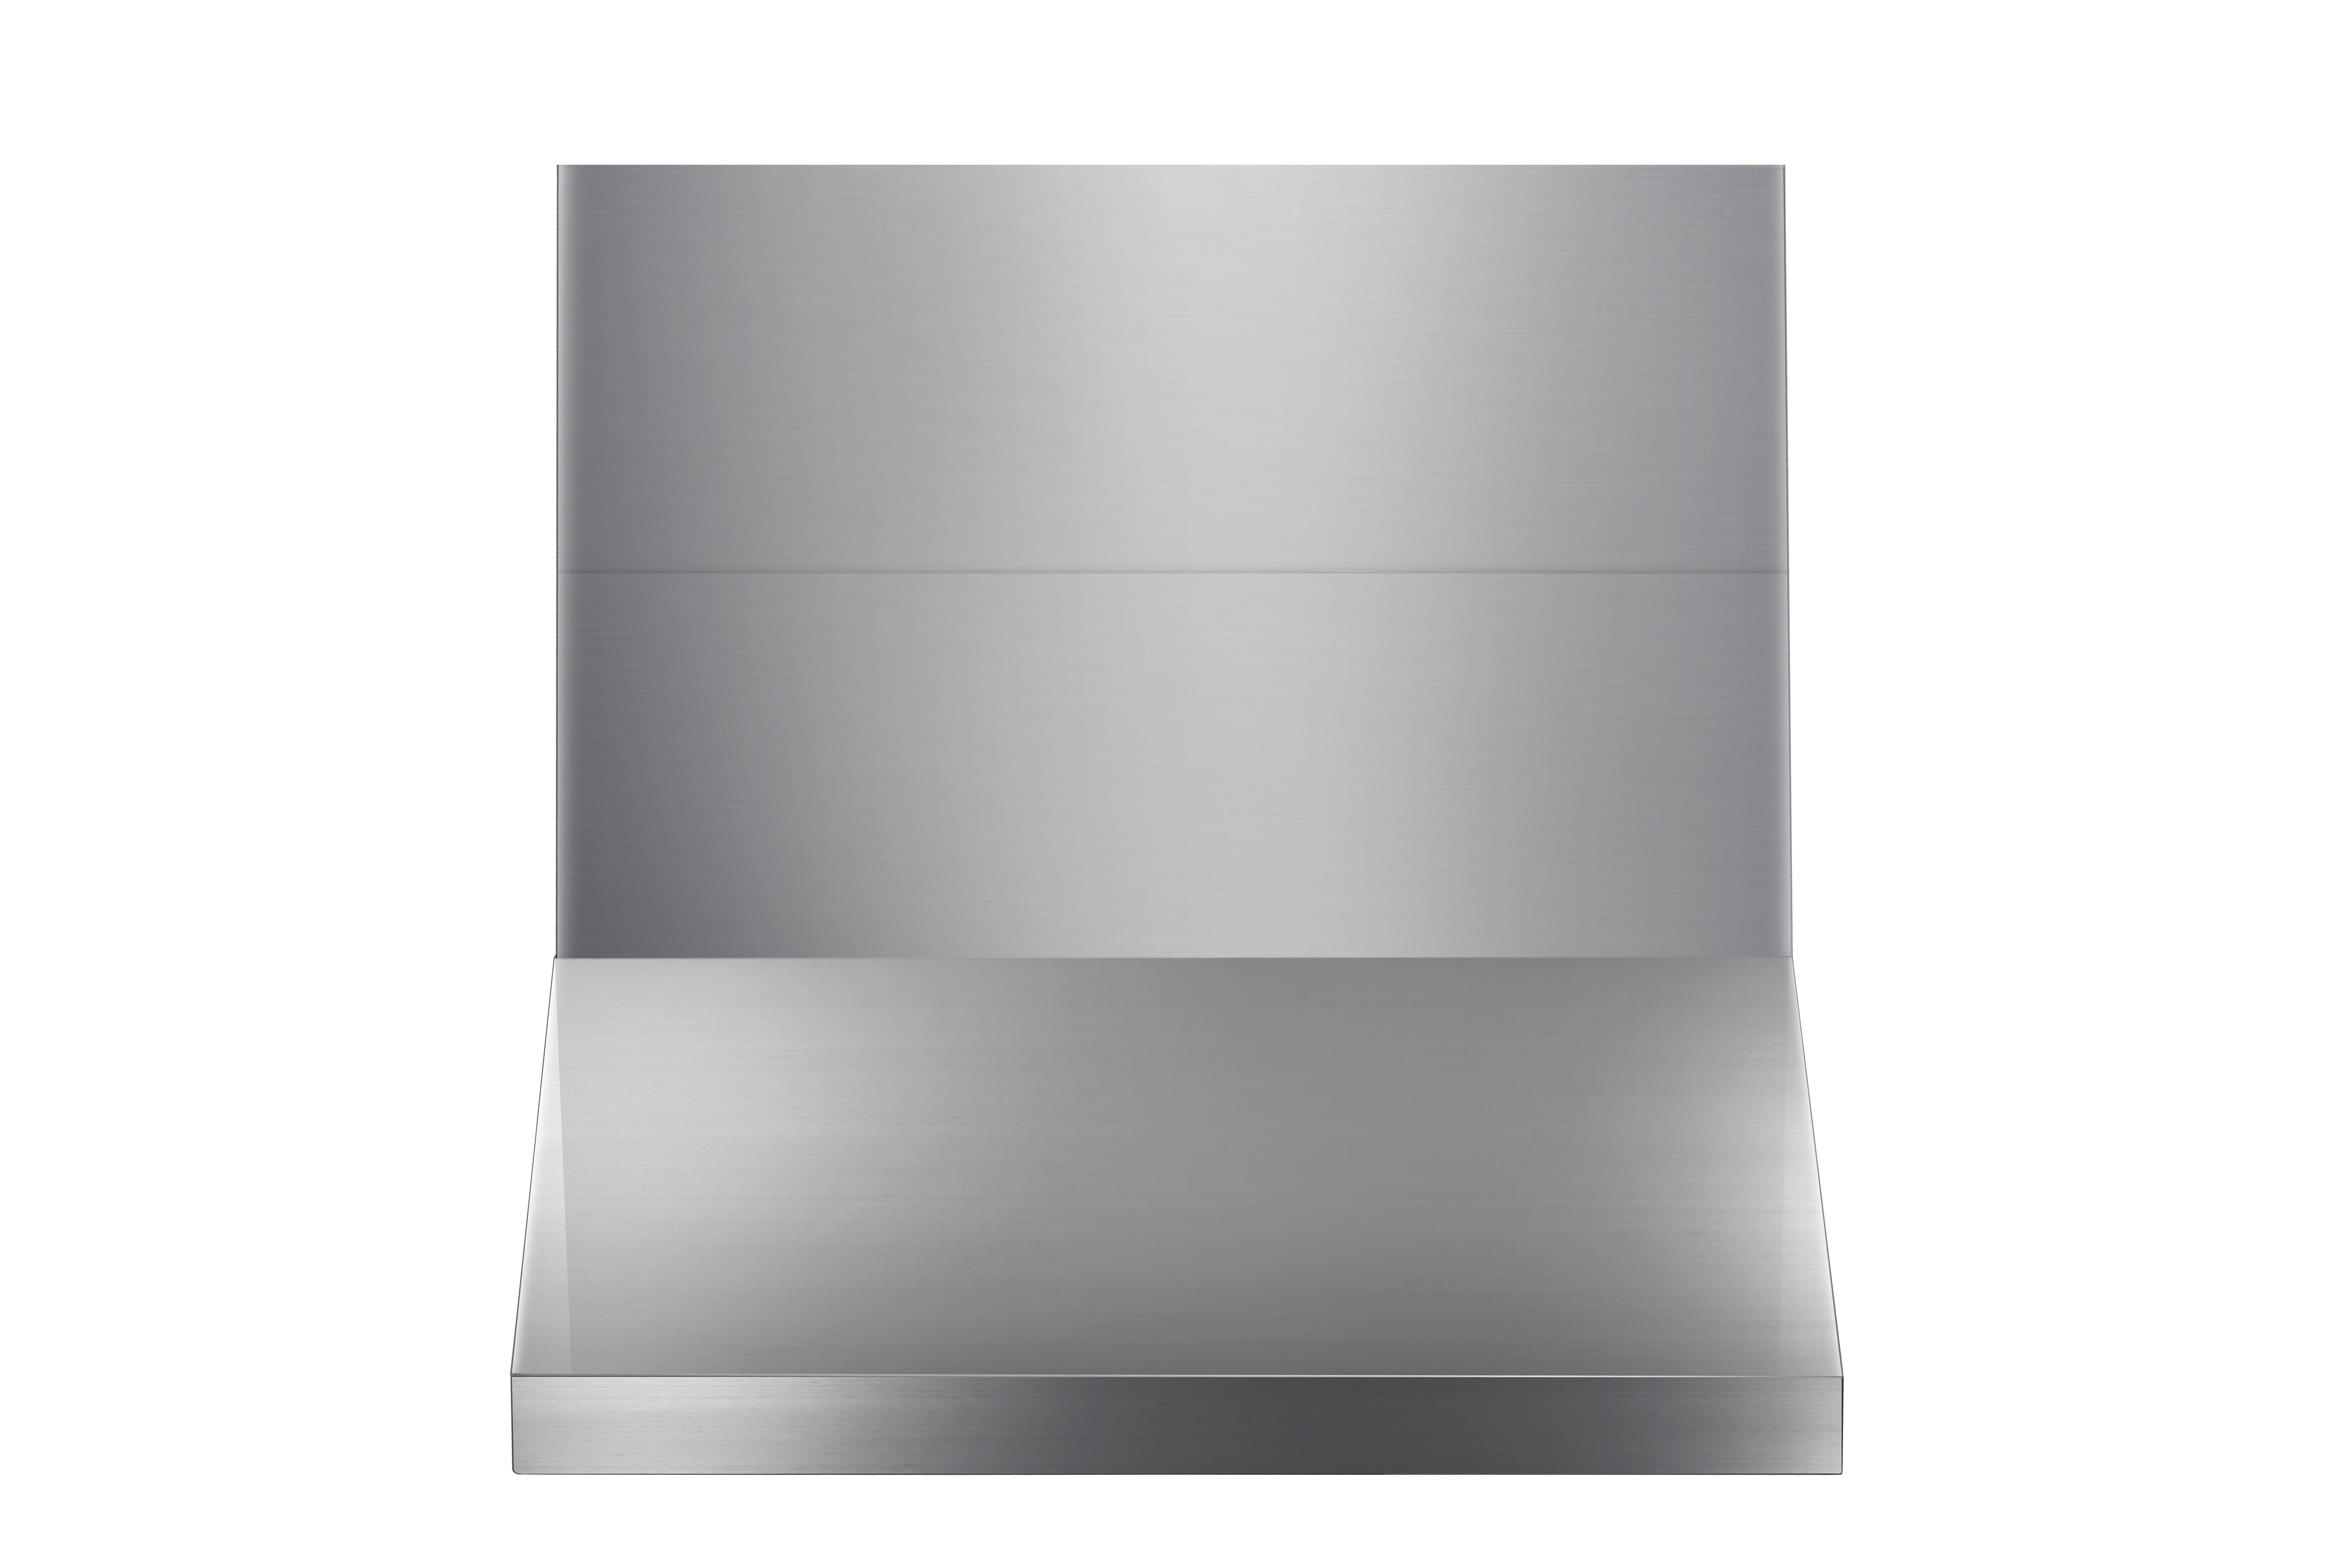 Thor Kitchen 48 Inch Professional Range Hood, 16.5 Inches Tall in Stainless Steel- Model TRH4805 (Renewed)